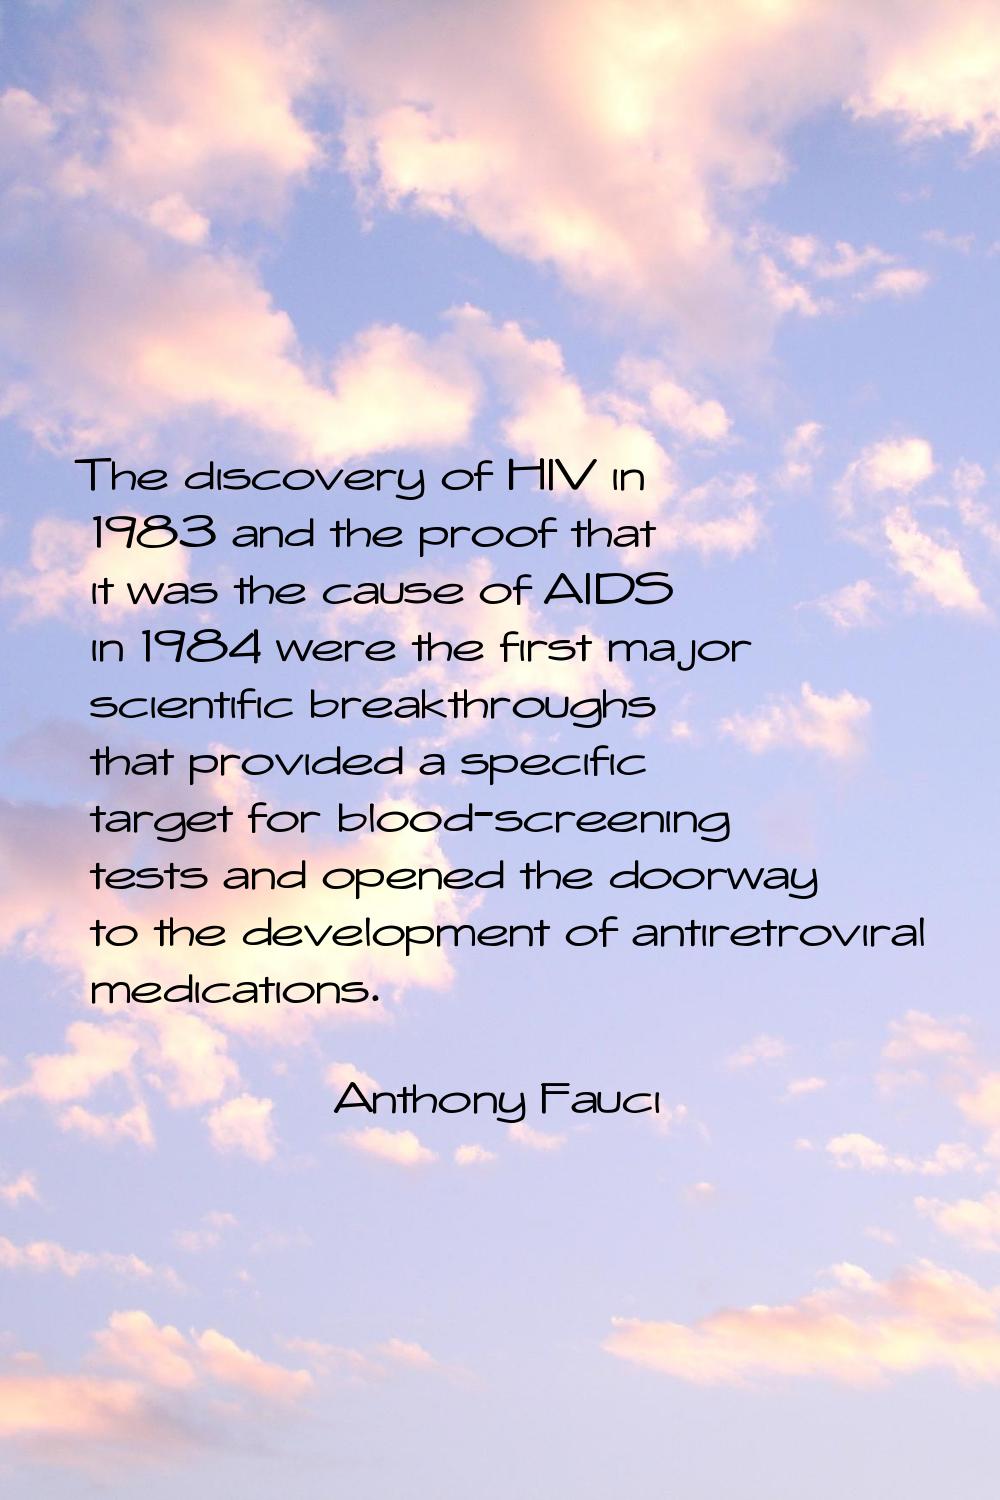 The discovery of HIV in 1983 and the proof that it was the cause of AIDS in 1984 were the first maj